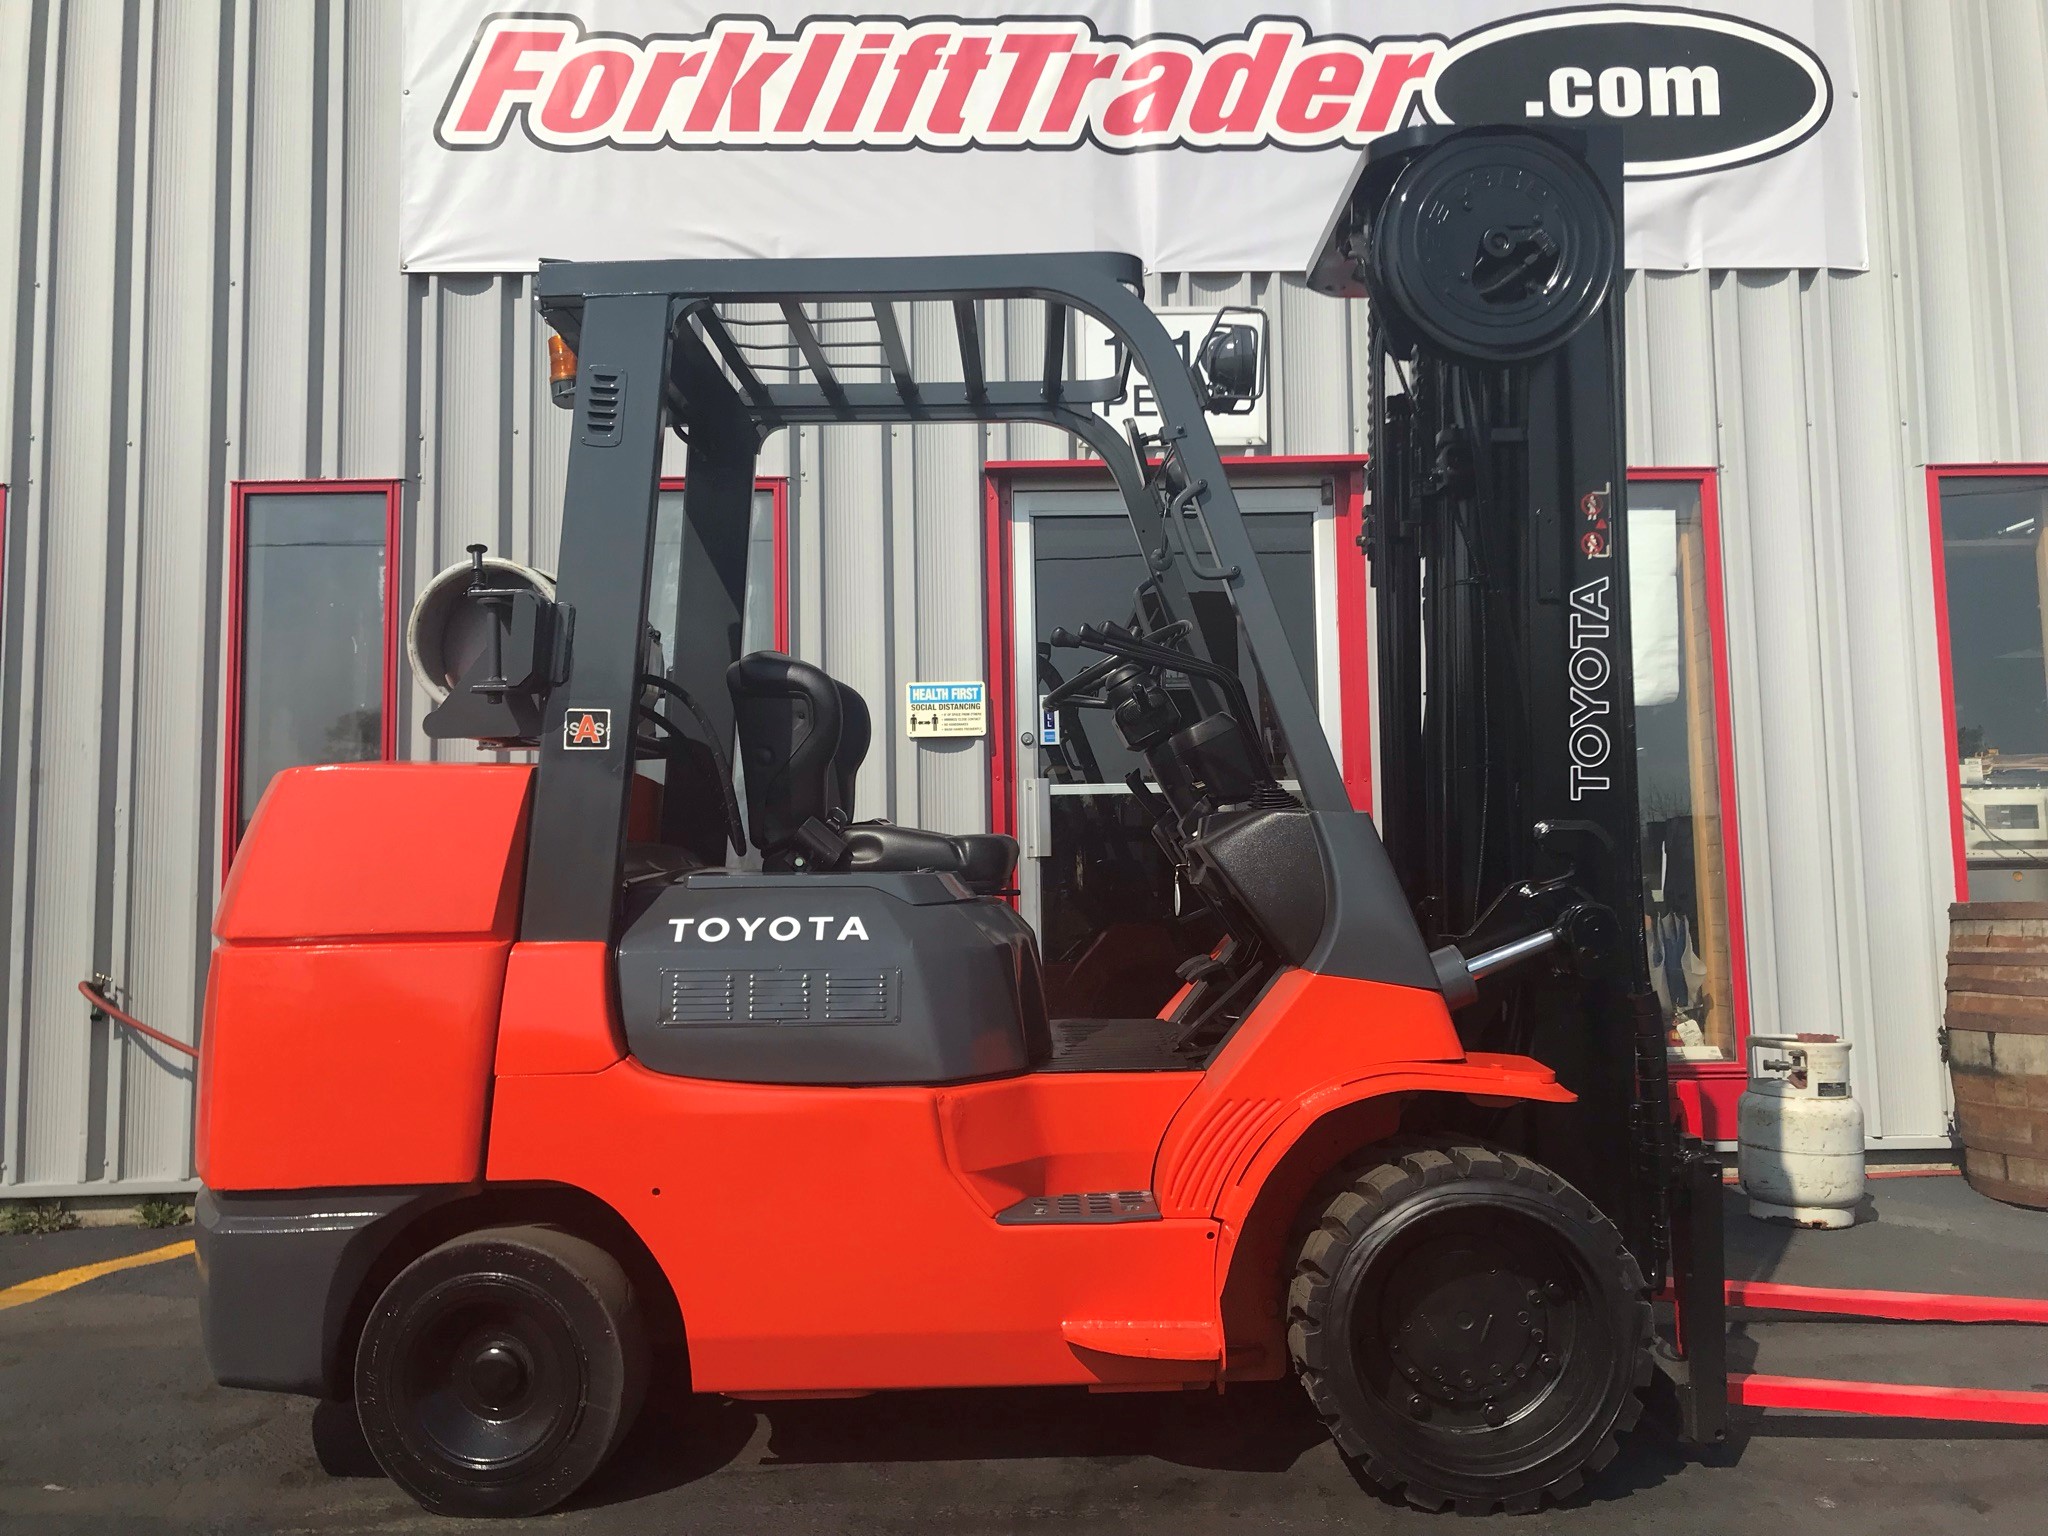 Orange 2003 toyota forklift with 187" lift height for sale